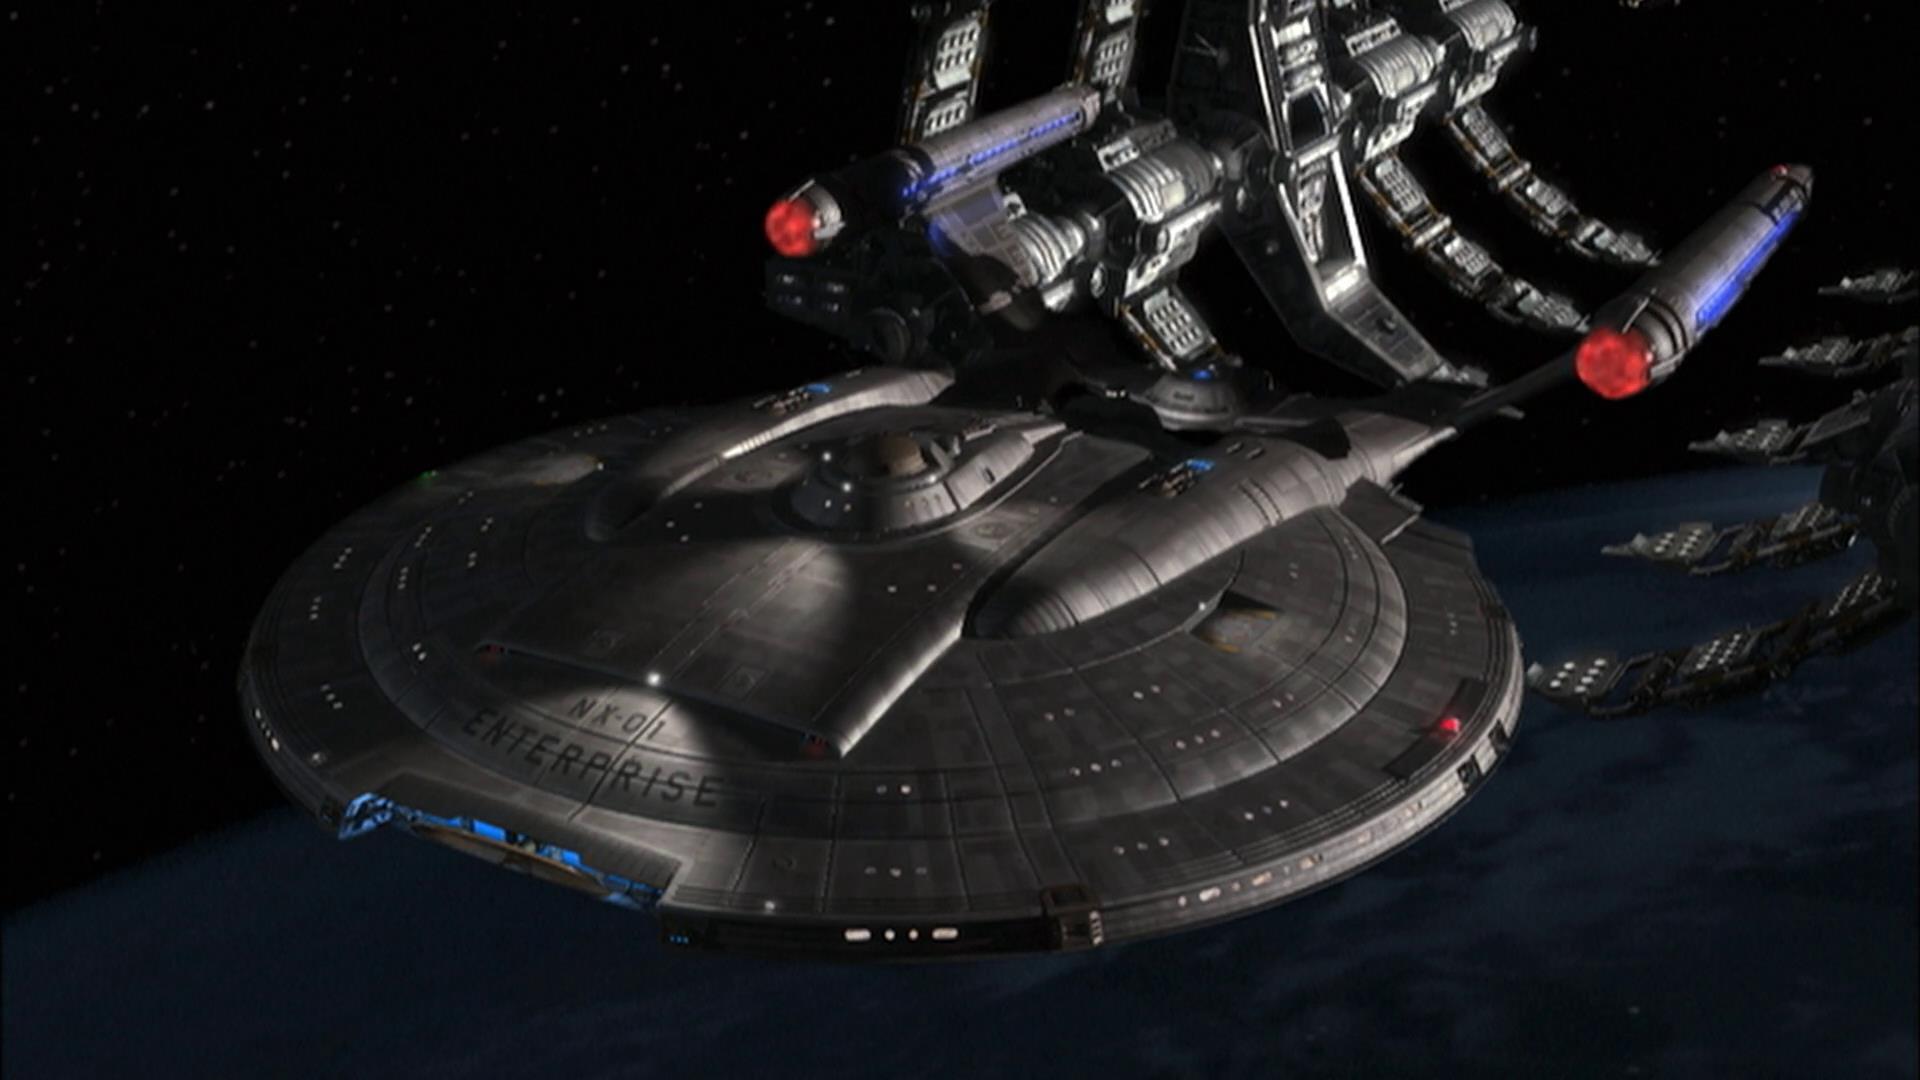 Enterprise (nx 01) Is A Fictional Spaceship Which Appeared In The ...